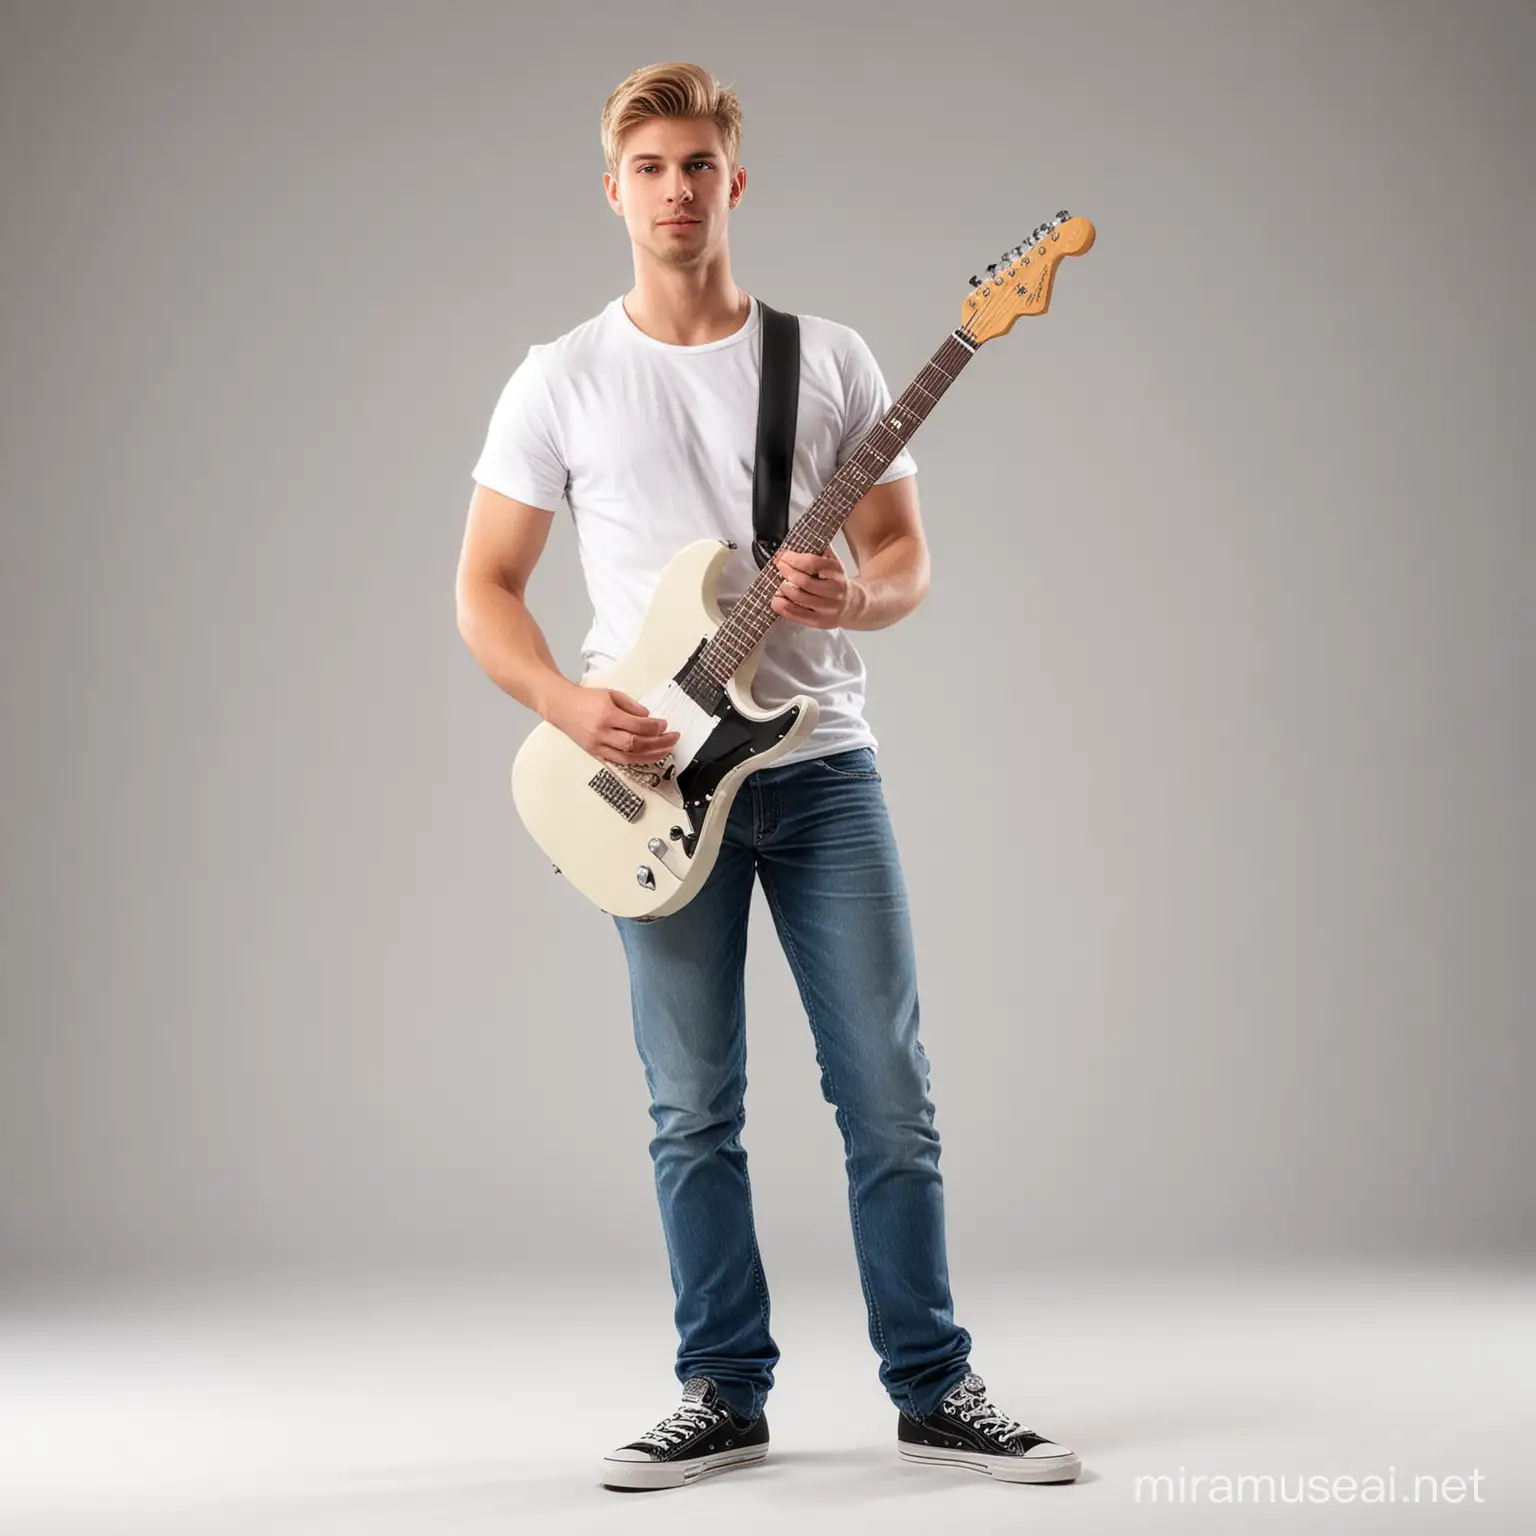 Standing photorealistic attractive blond man 25 years old in jeans and plain white t-shirt without pockets and without straps holding an electric guitar in his hand, full body front view perpendicular to the lens in a photo studio on a white background.